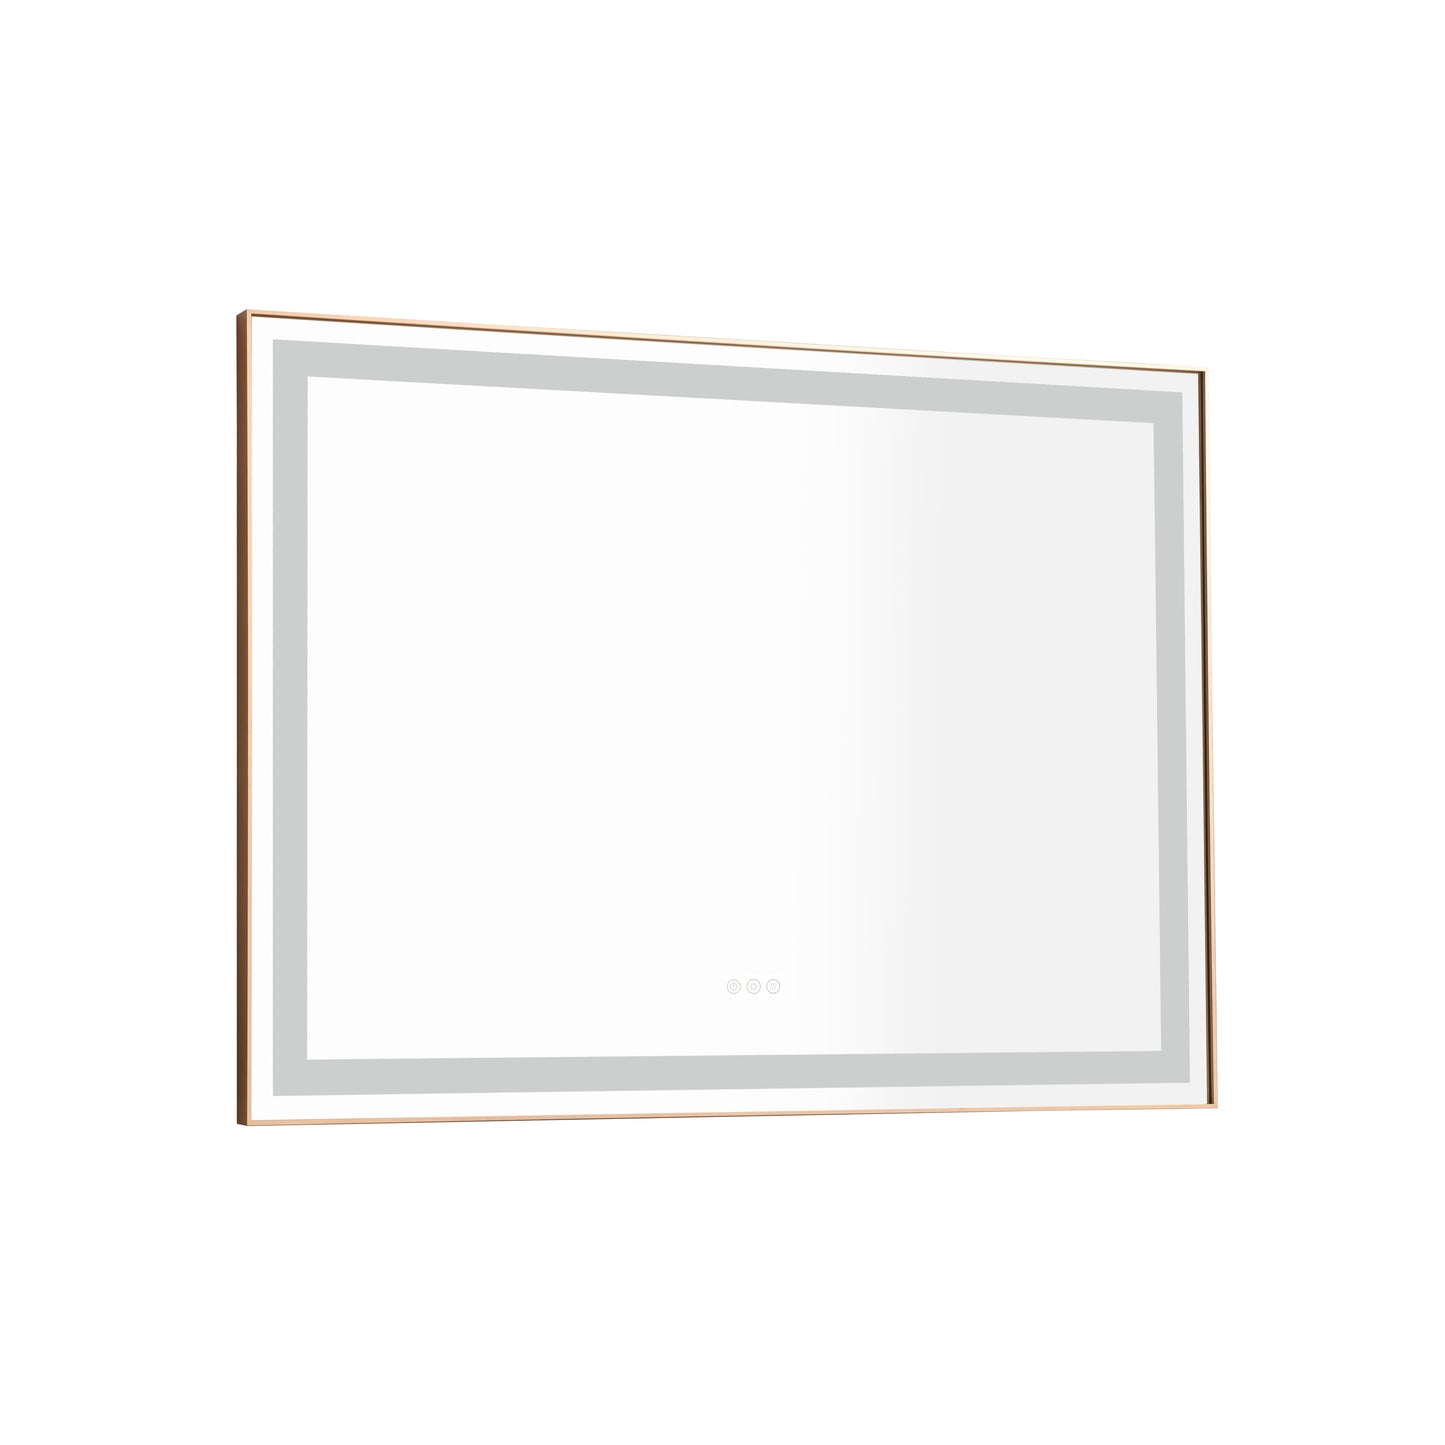 LTL needs to consult the warehouse address48*36 LED Lighted Bathroom Wall Mounted Mirror with High Lumen+Anti-Fog Separately Control